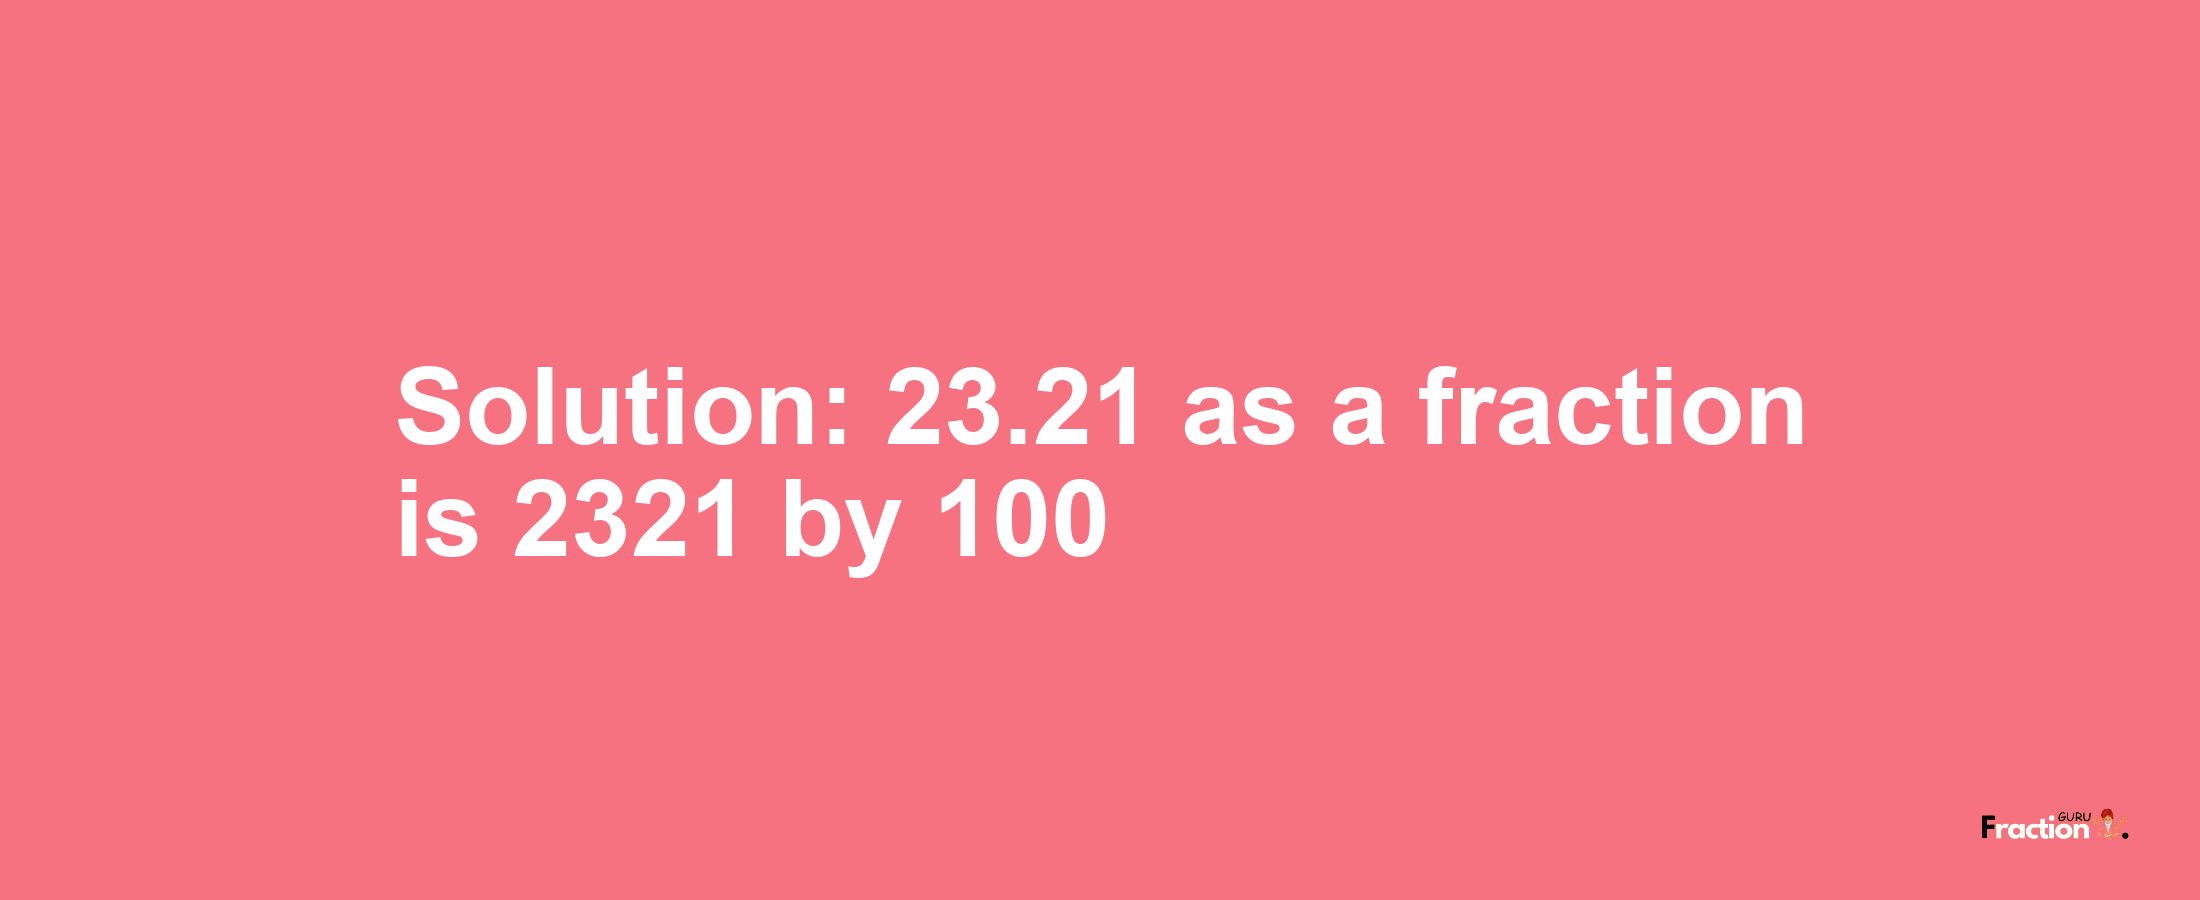 Solution:23.21 as a fraction is 2321/100